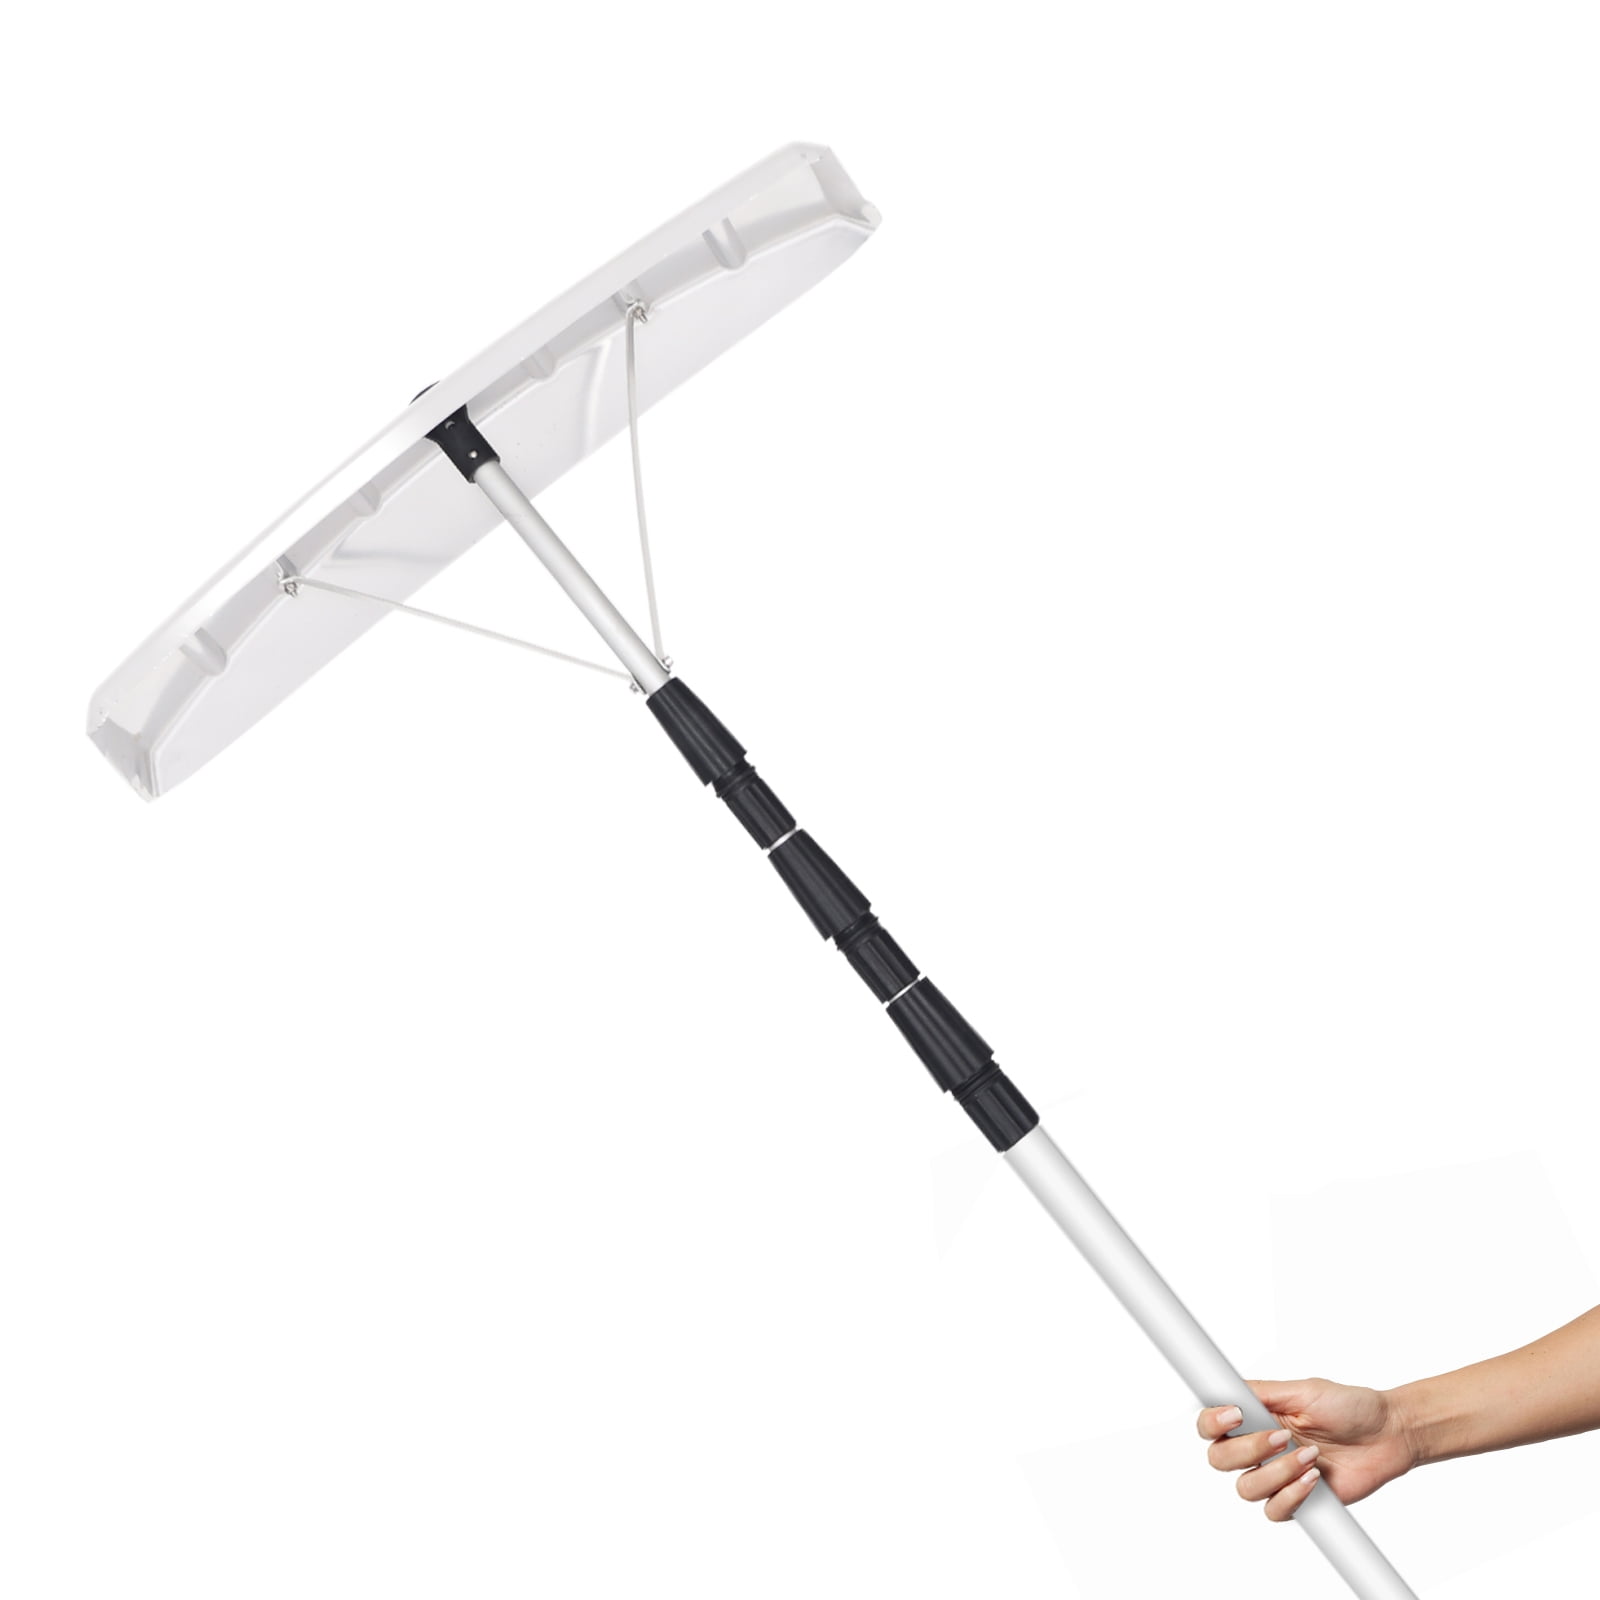 Goplus Roof Snow Rake 21ft Extension Light Weight Aluminum Roof Snow Removal Tool Black